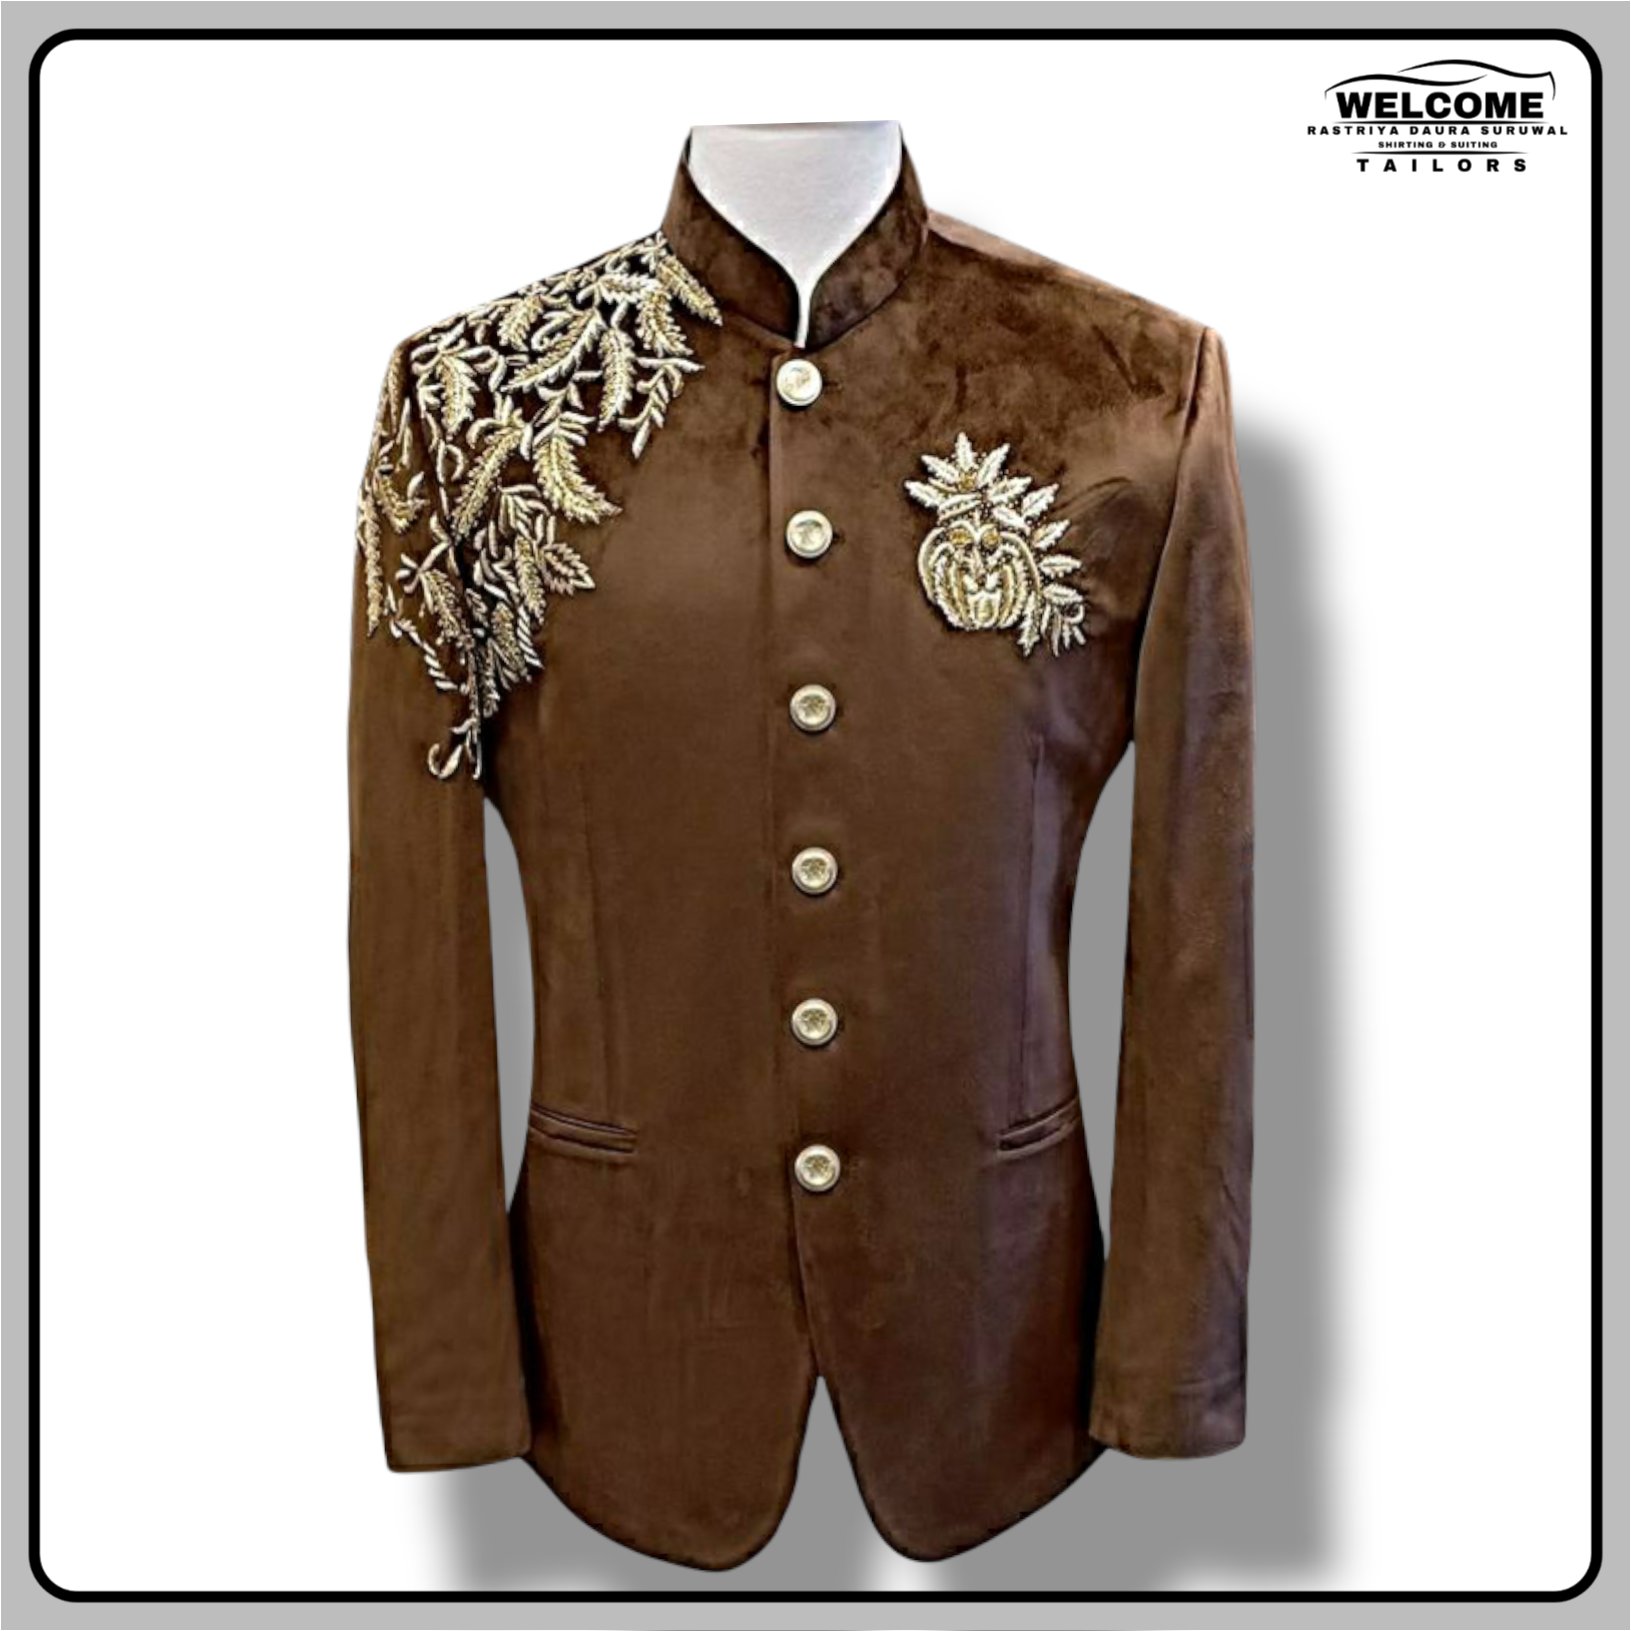 Prince Charming Costume, Royal prince's performance costume with gold  flowers | princecostume.store